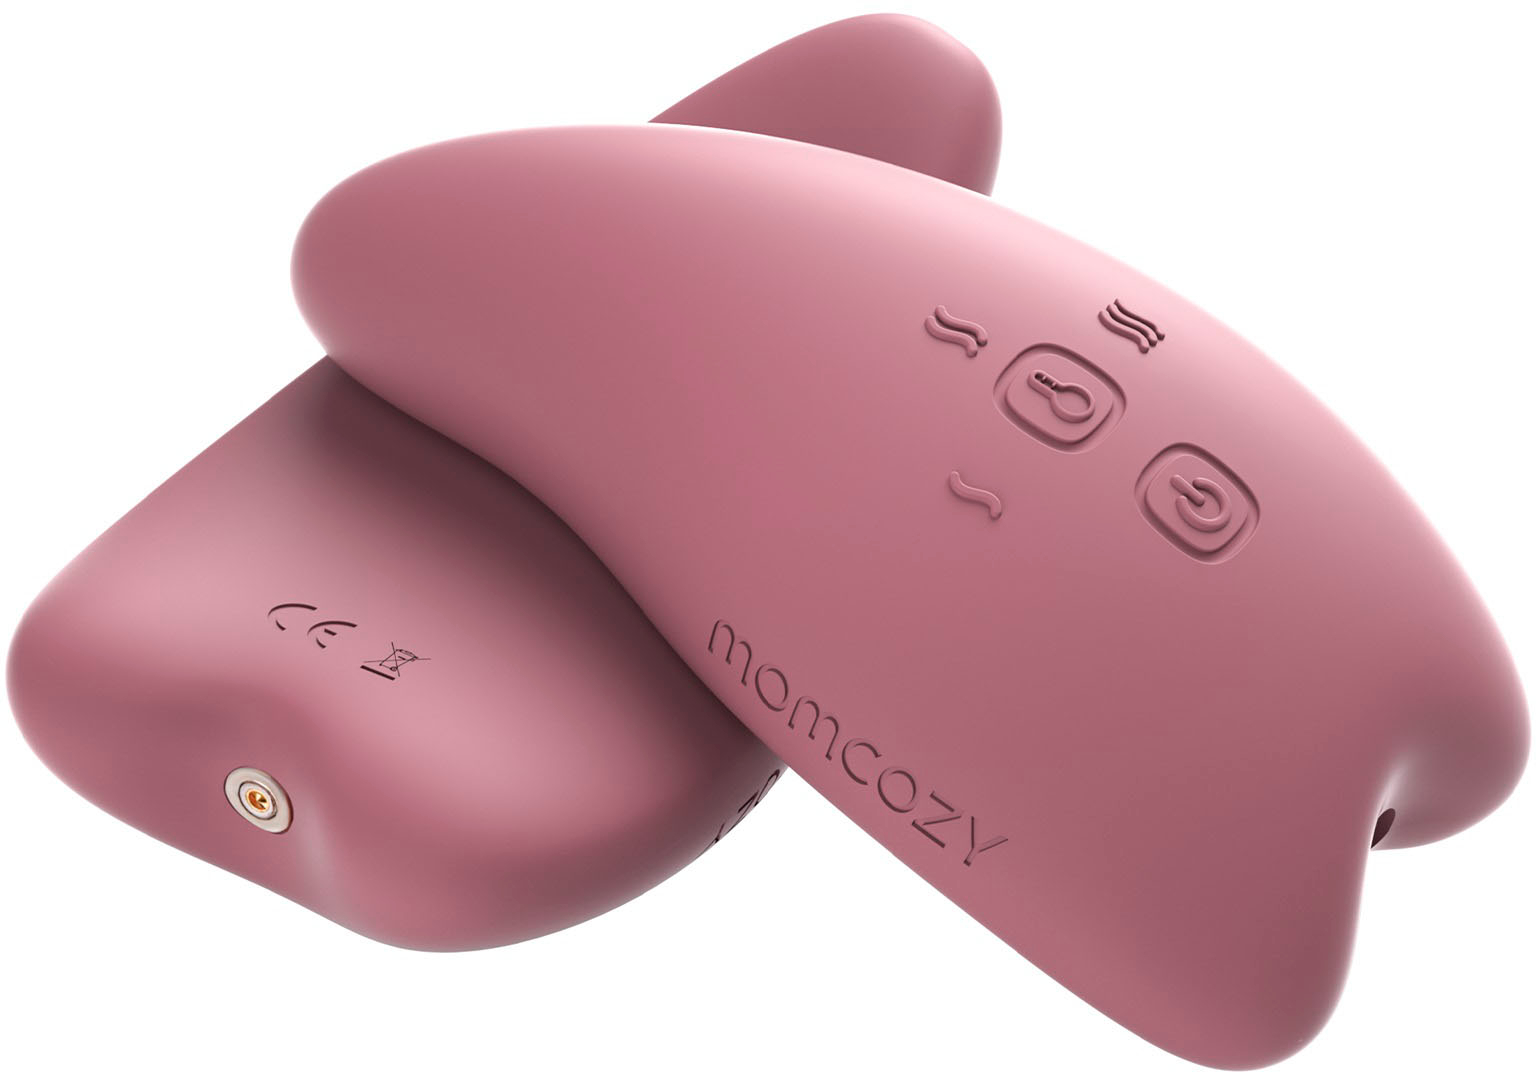 Momcozy Double 2-in-1 Warming Vibration Lactation Massager Rose